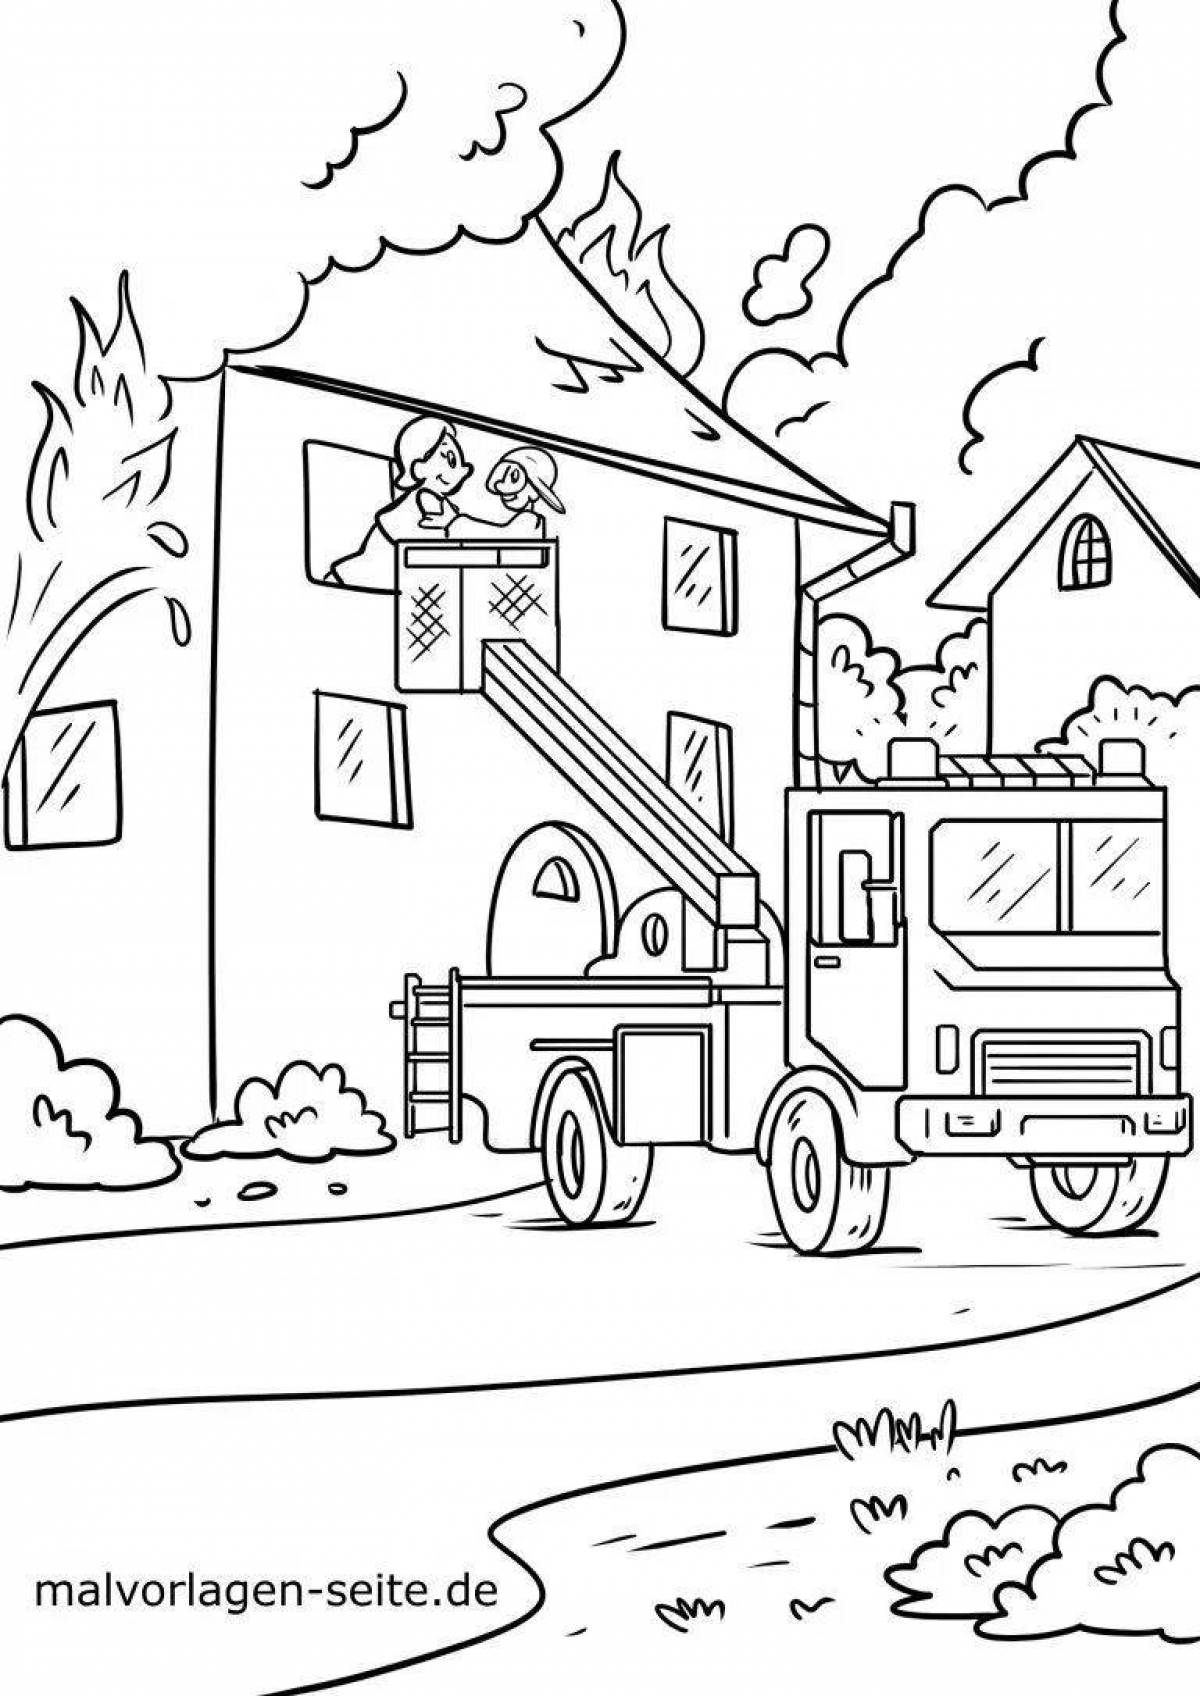 Incredible burning house coloring book for kids